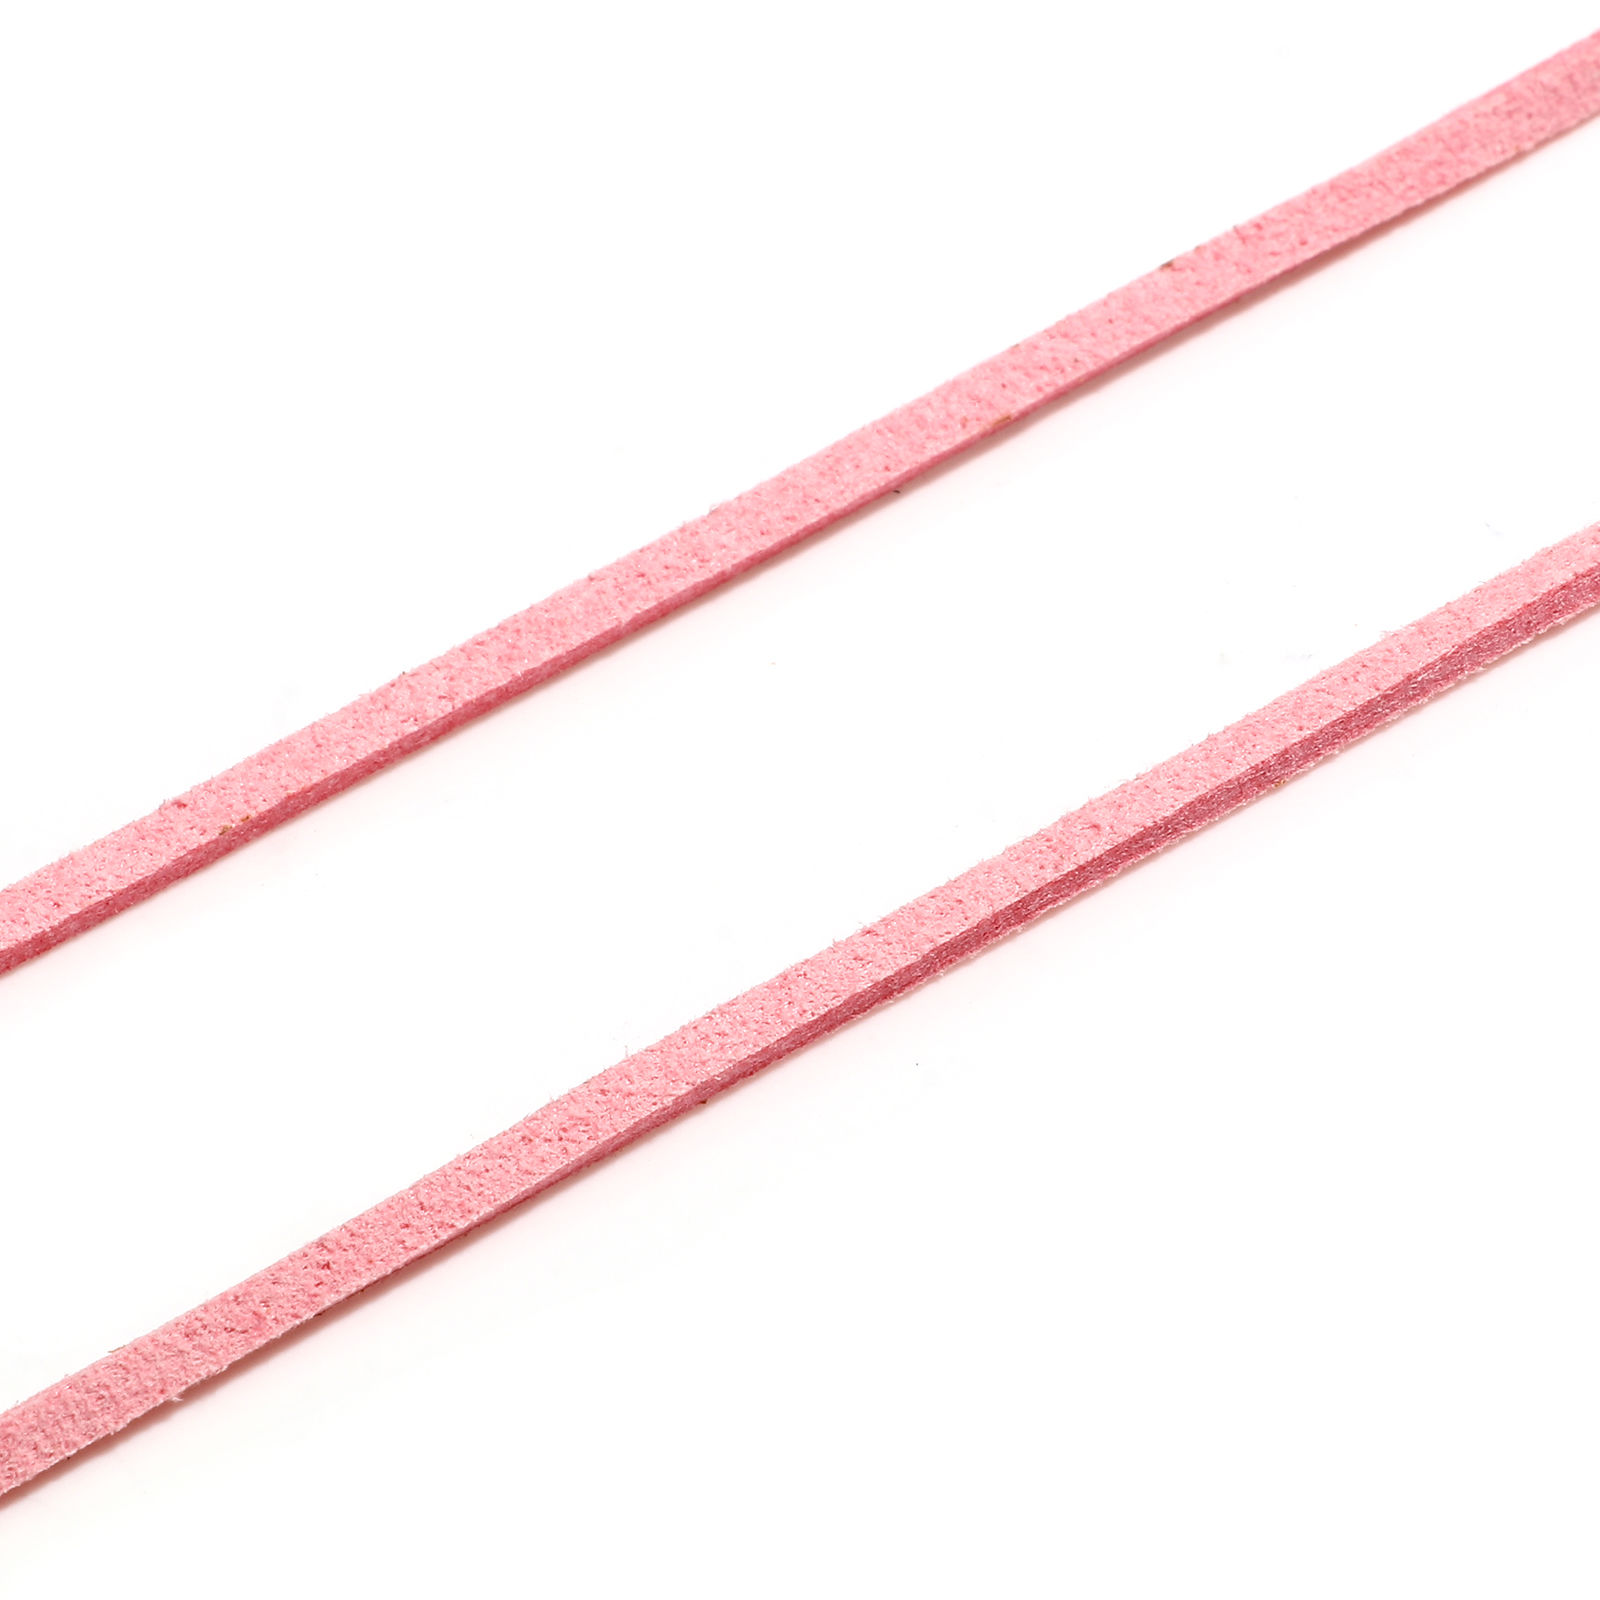 Picture of Velvet Jewelry Cord Rope Light Pink Faux Suede 3mm, 1 Bundle (Approx 5 M/Bundle)